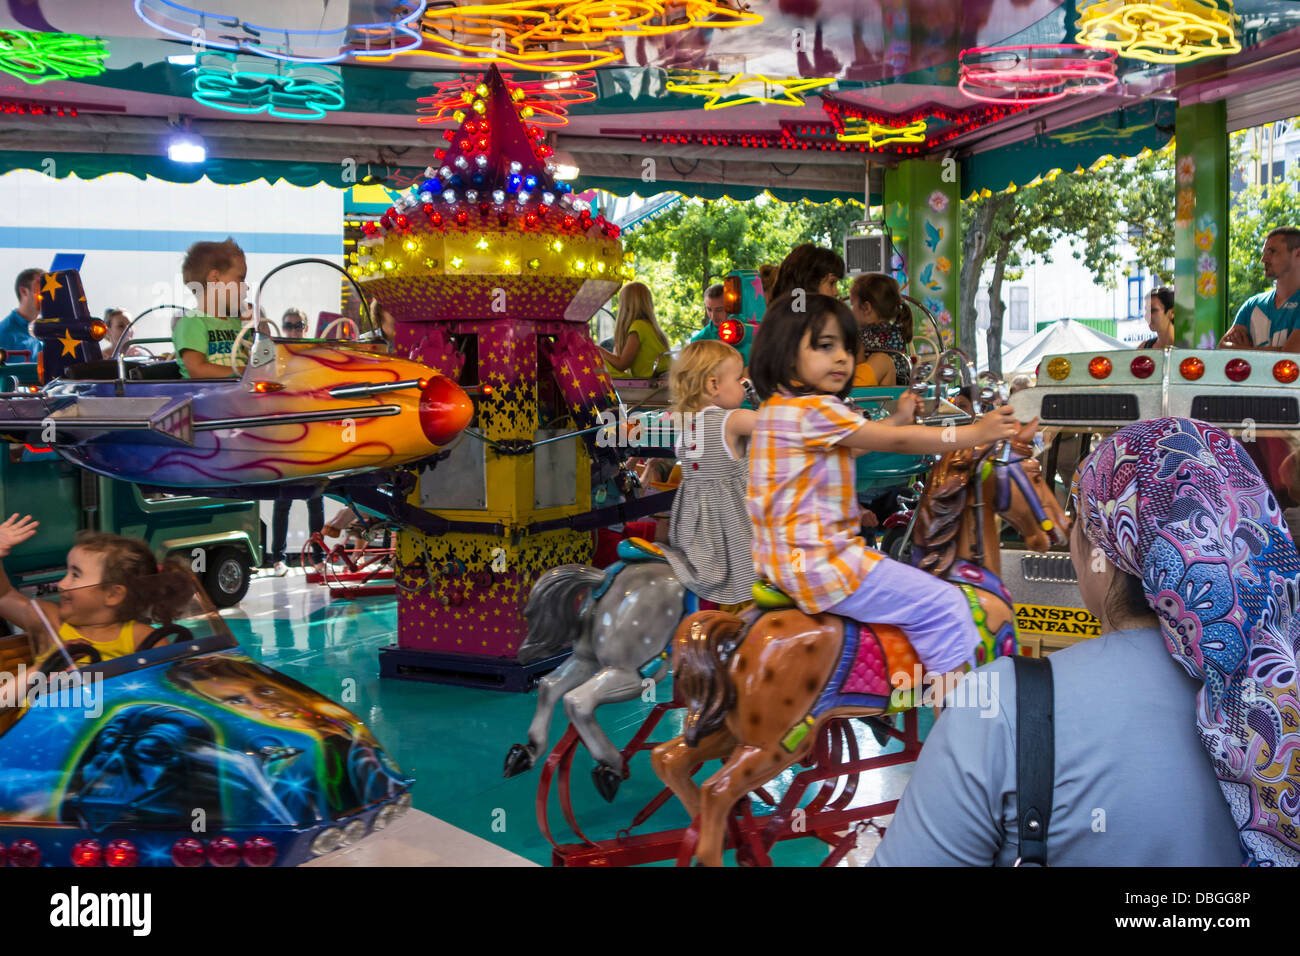 Children riding merry-go-round / carousel at traveling funfair / travelling fun fair Stock Photo